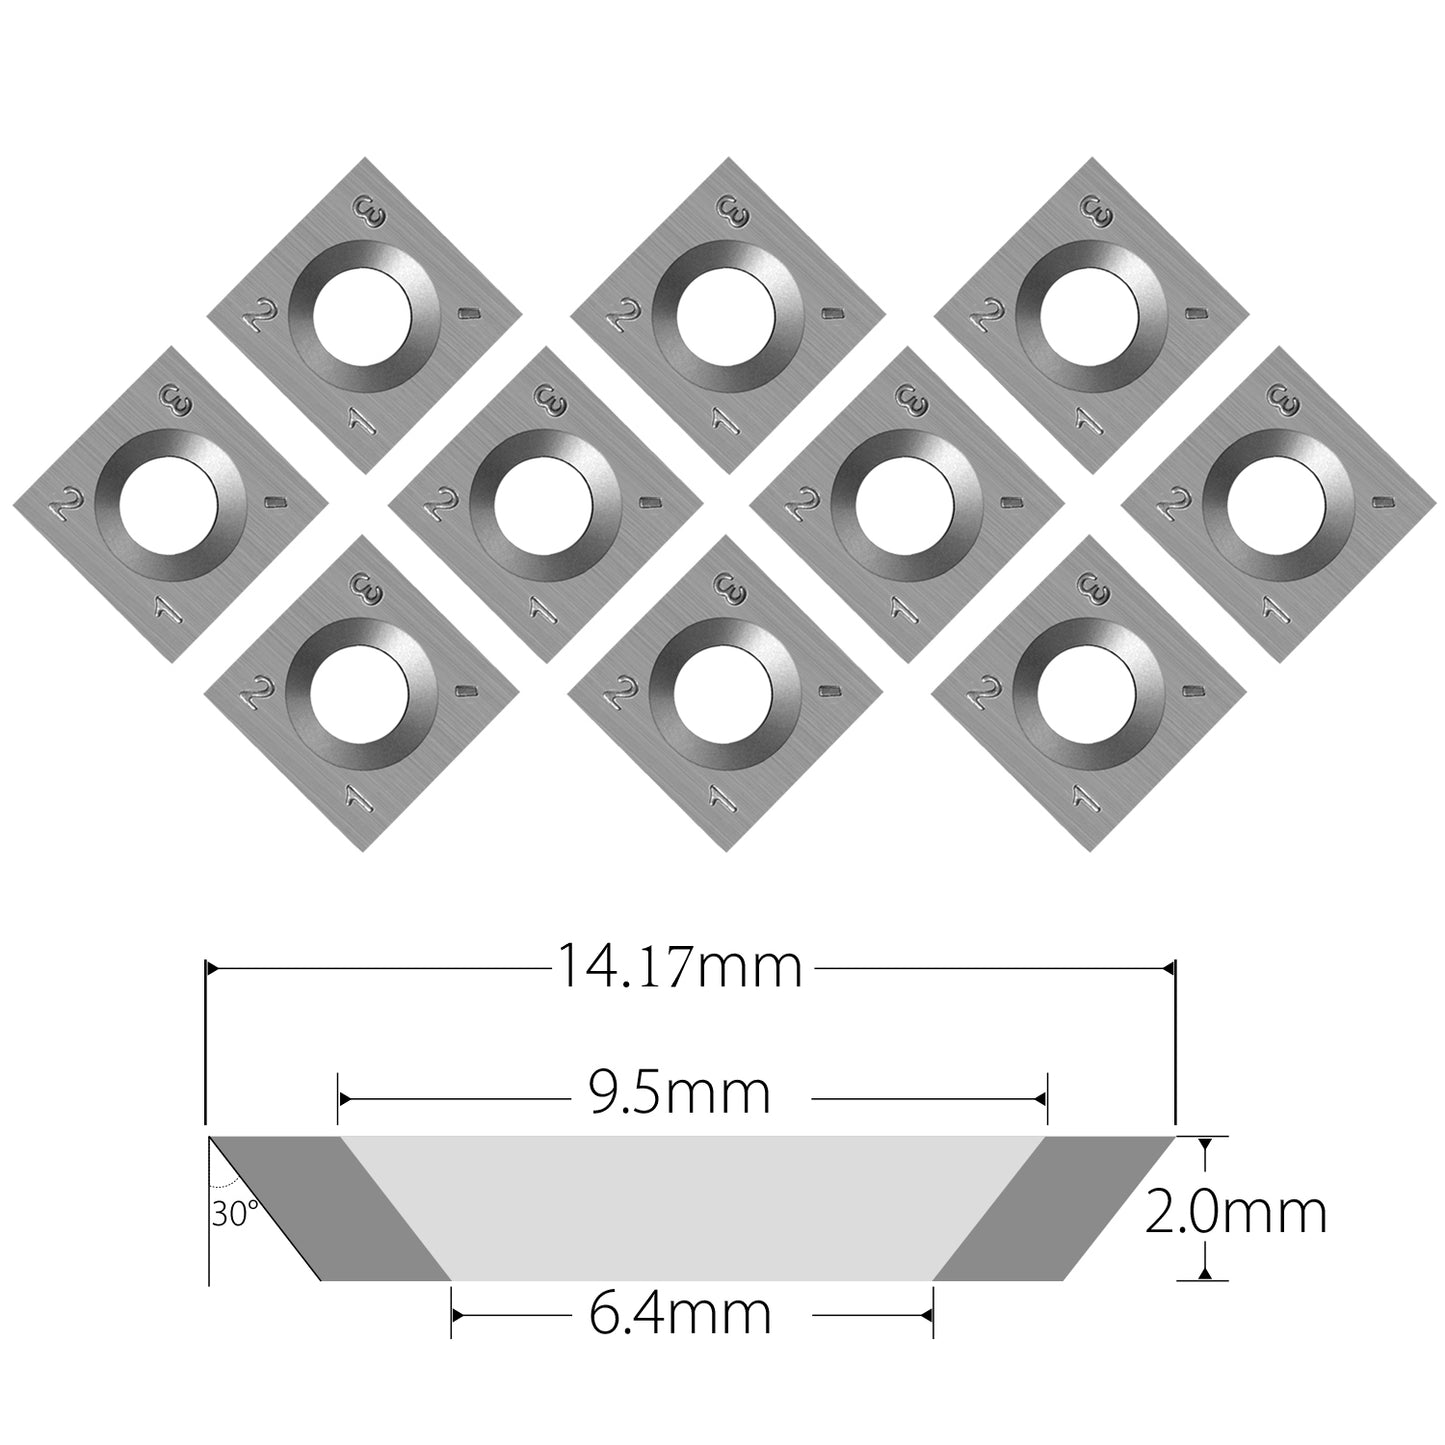 Woodworking Indexable Carbide Insert 14.17x14.17x2mm-30° for Shop Fox Spiral Cutterhead Jointers and Planers